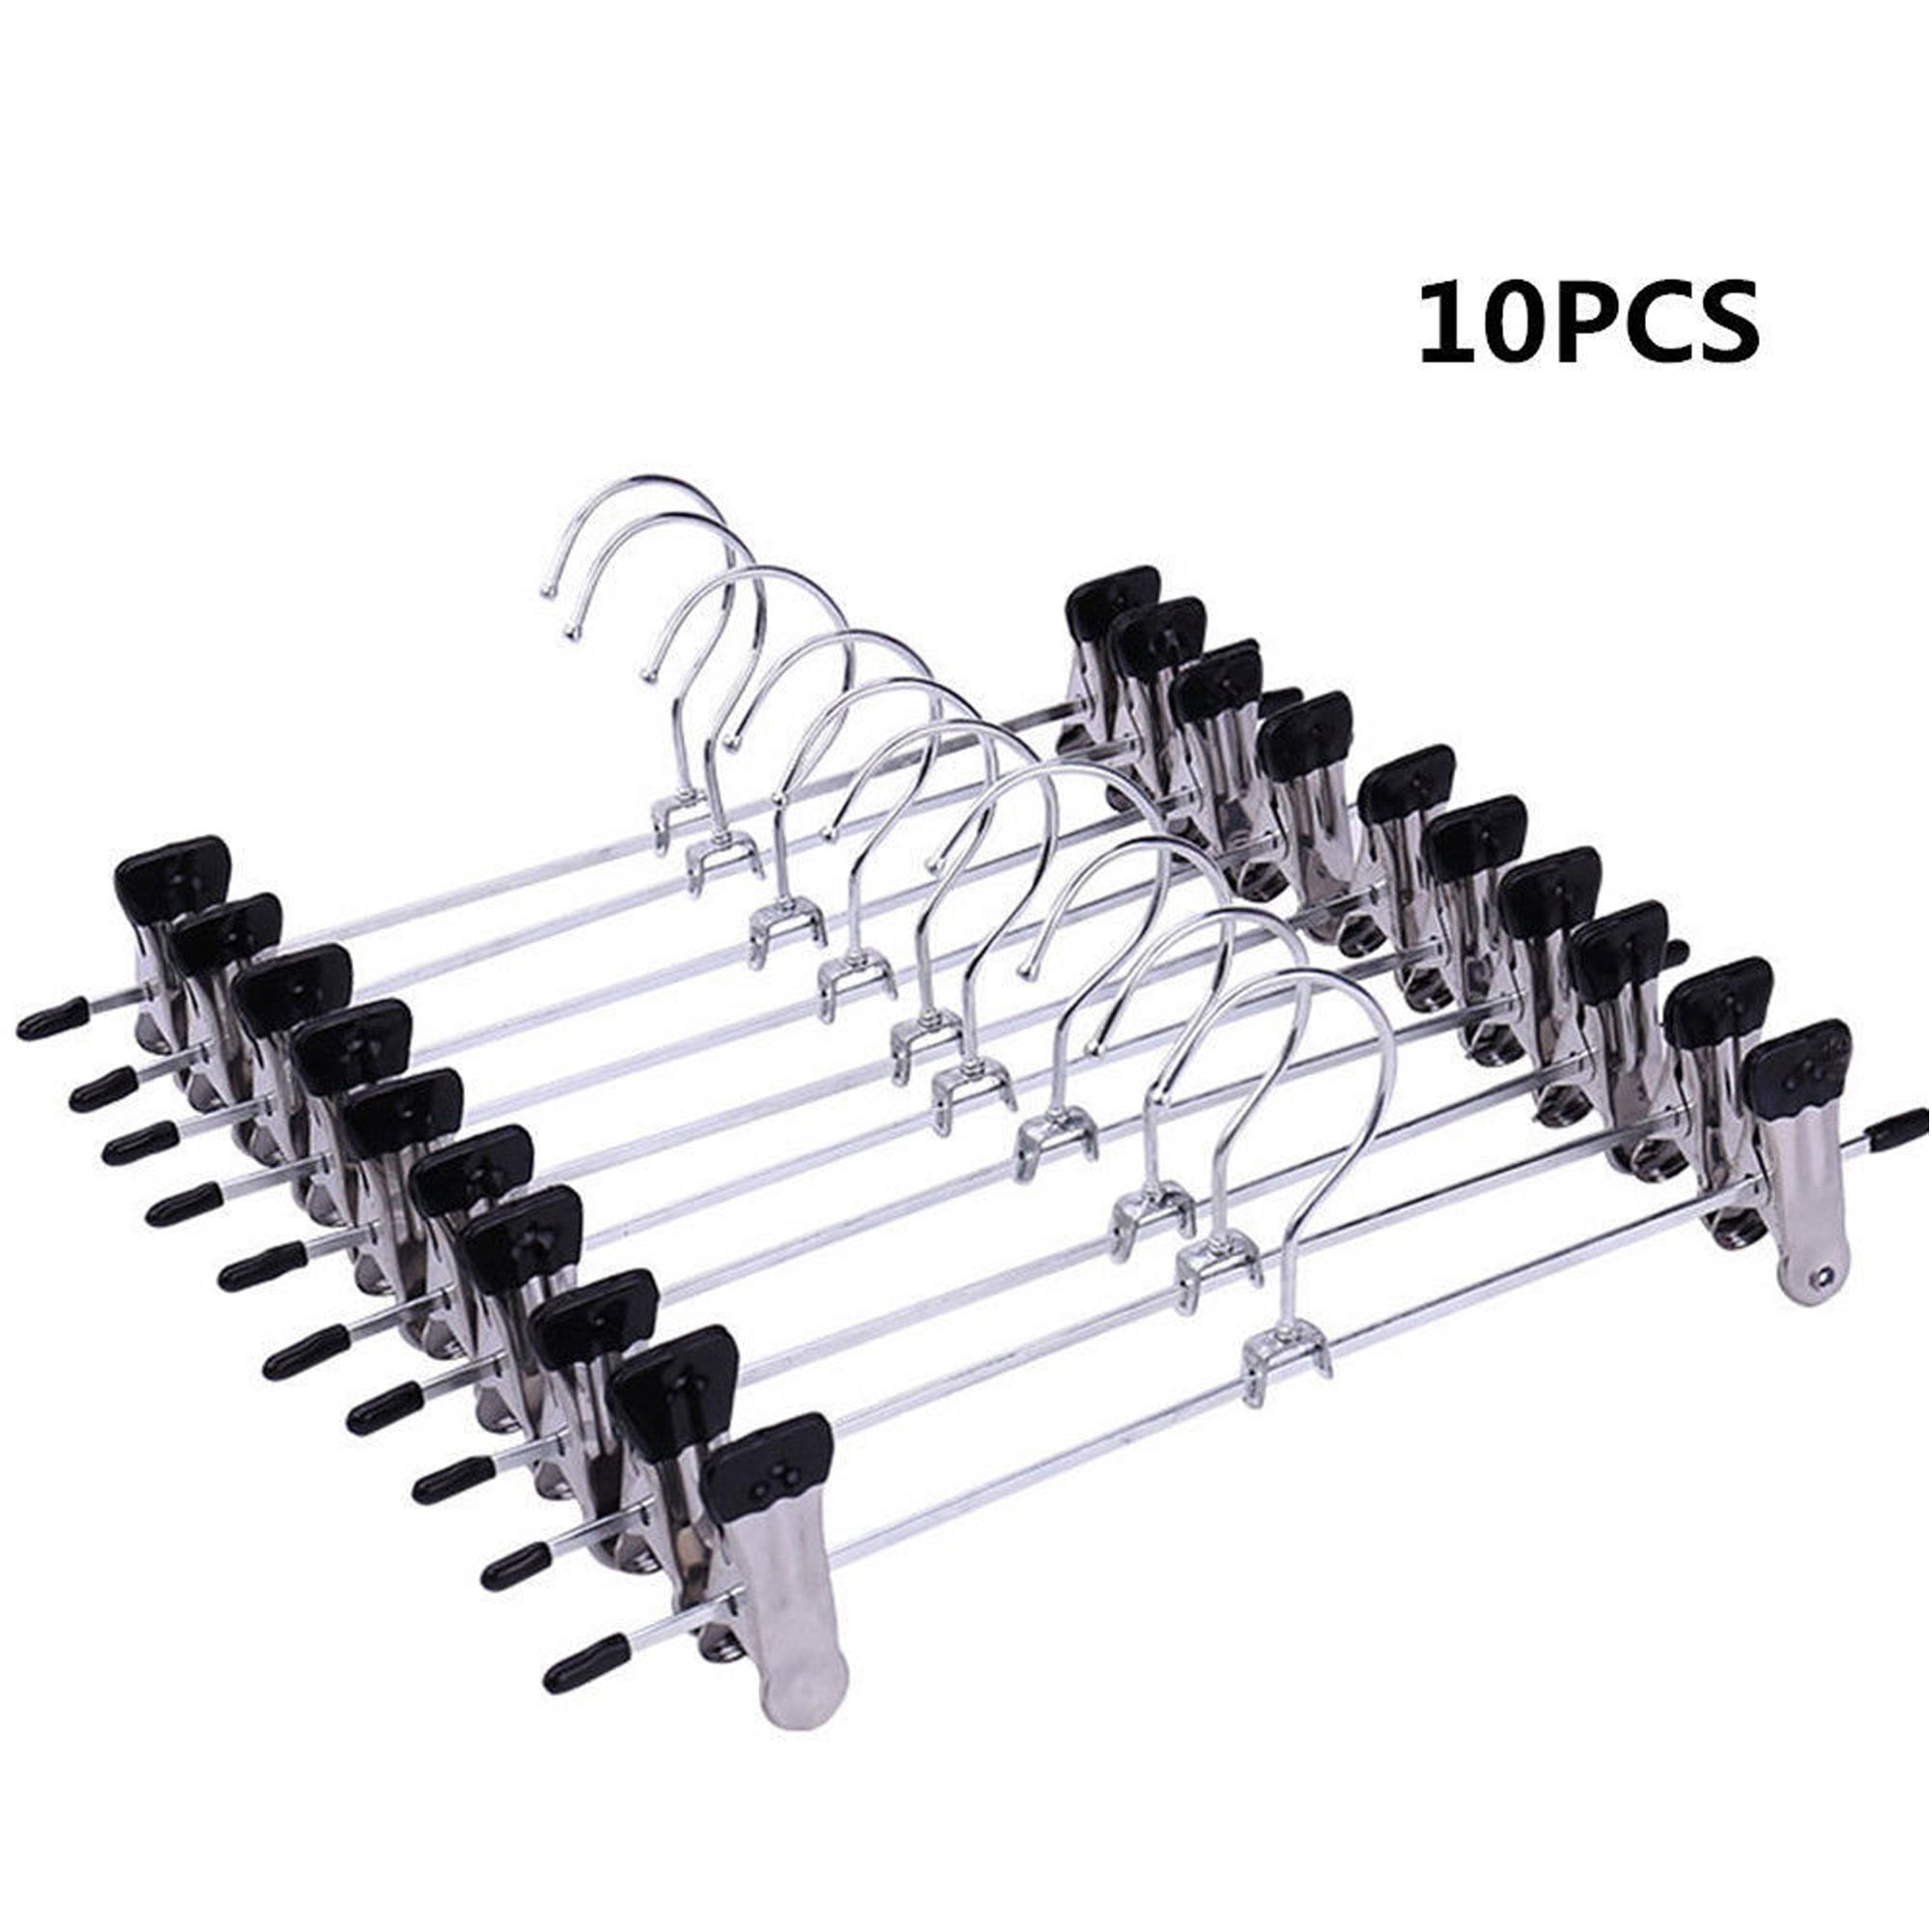 Slacks Pants and More Jeans Fhdpeebu Trouser Hangers Skirt Hangers with Clips 20 Pack Metal Pant Clip Hangers for Space Saving Ultra Thin Rust Resistant Hangers for Skirts